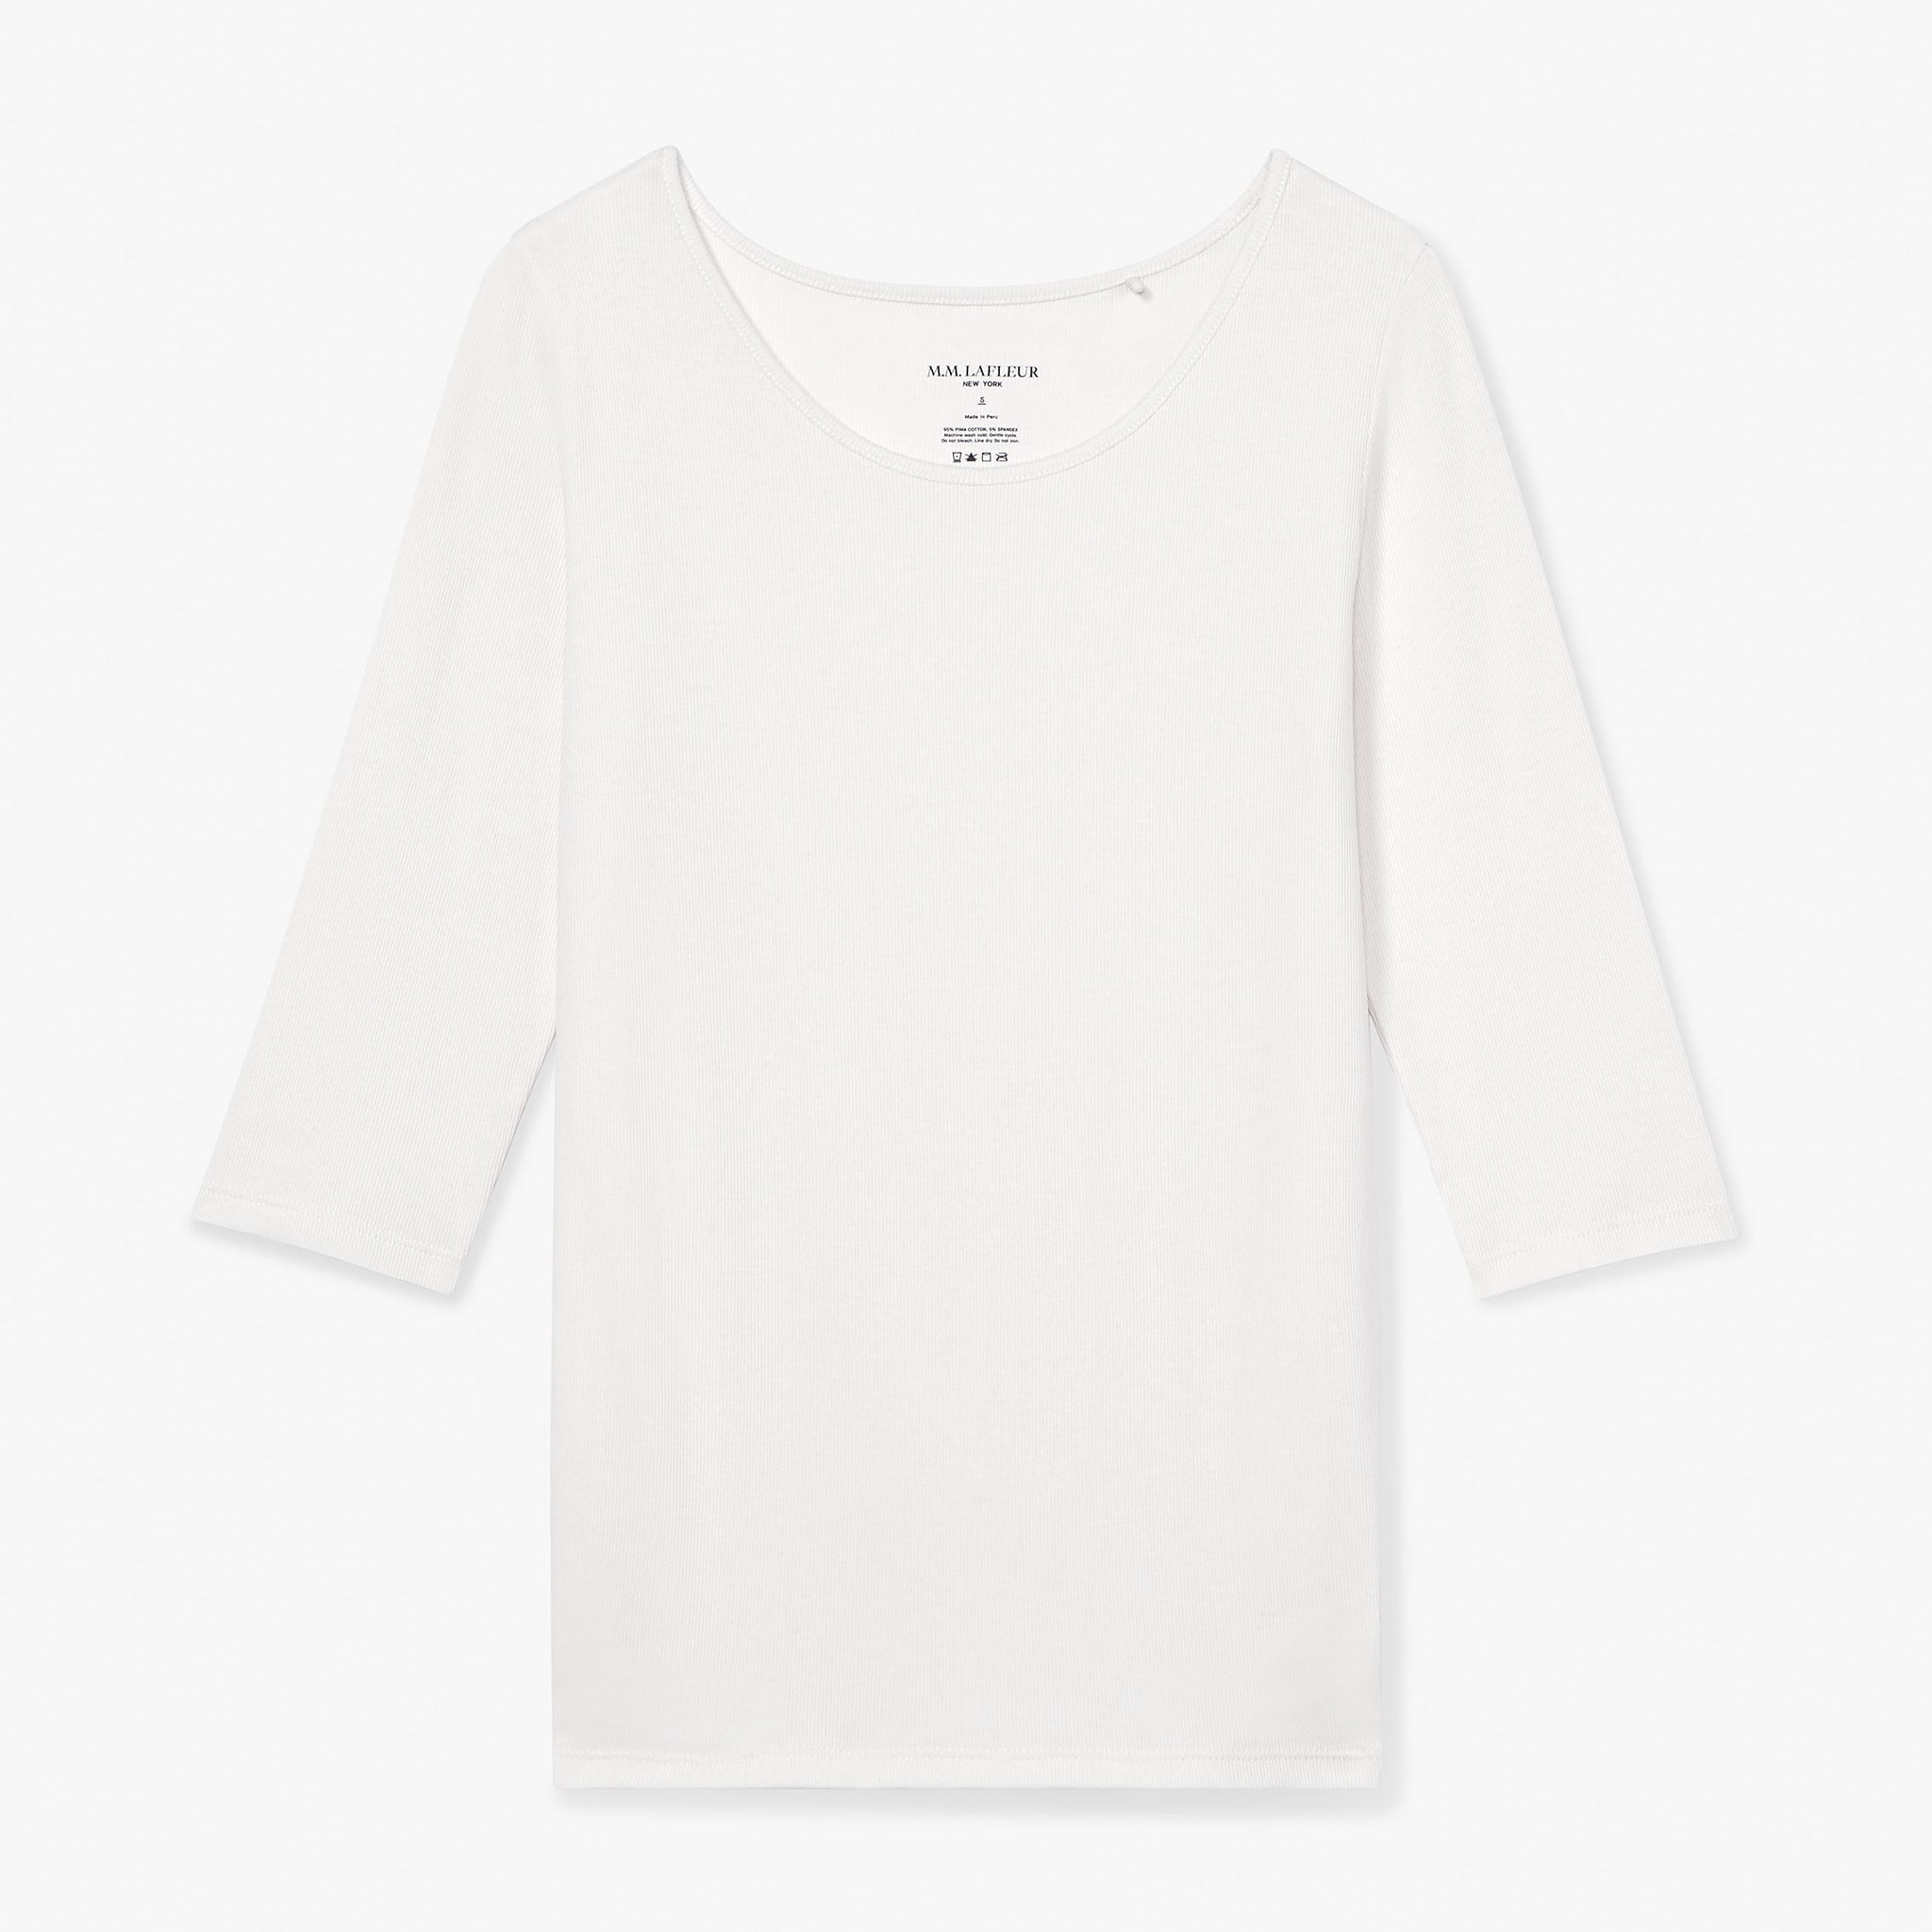 Packshot image of the Soyoung tee in Ivory